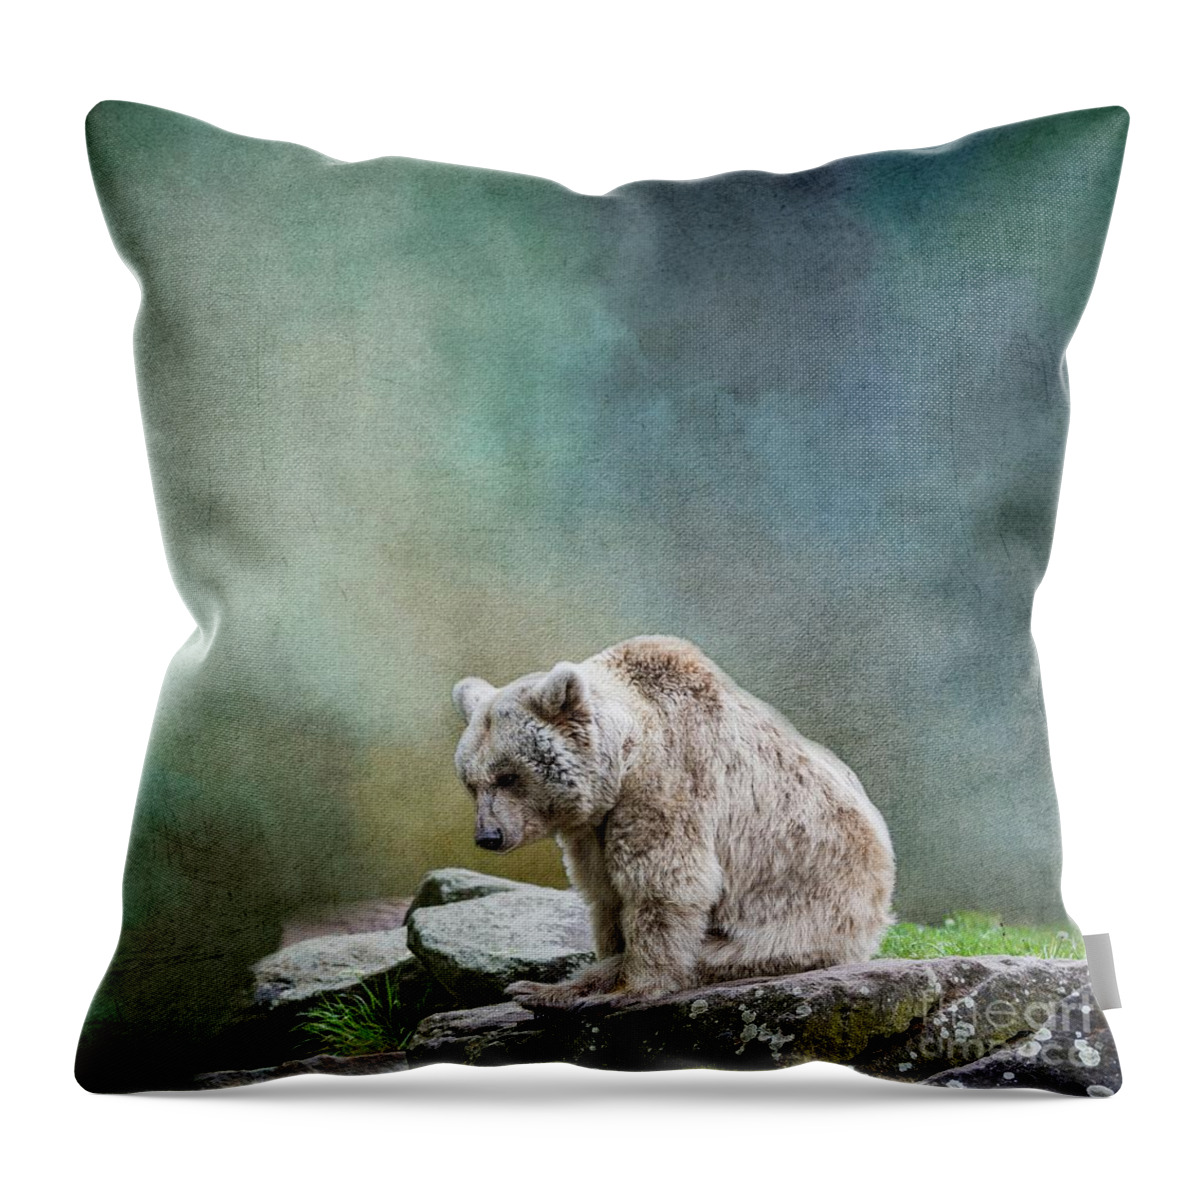 Syrian Brown Bear Throw Pillow featuring the photograph Syrian Brown Bear-3 by Eva Lechner